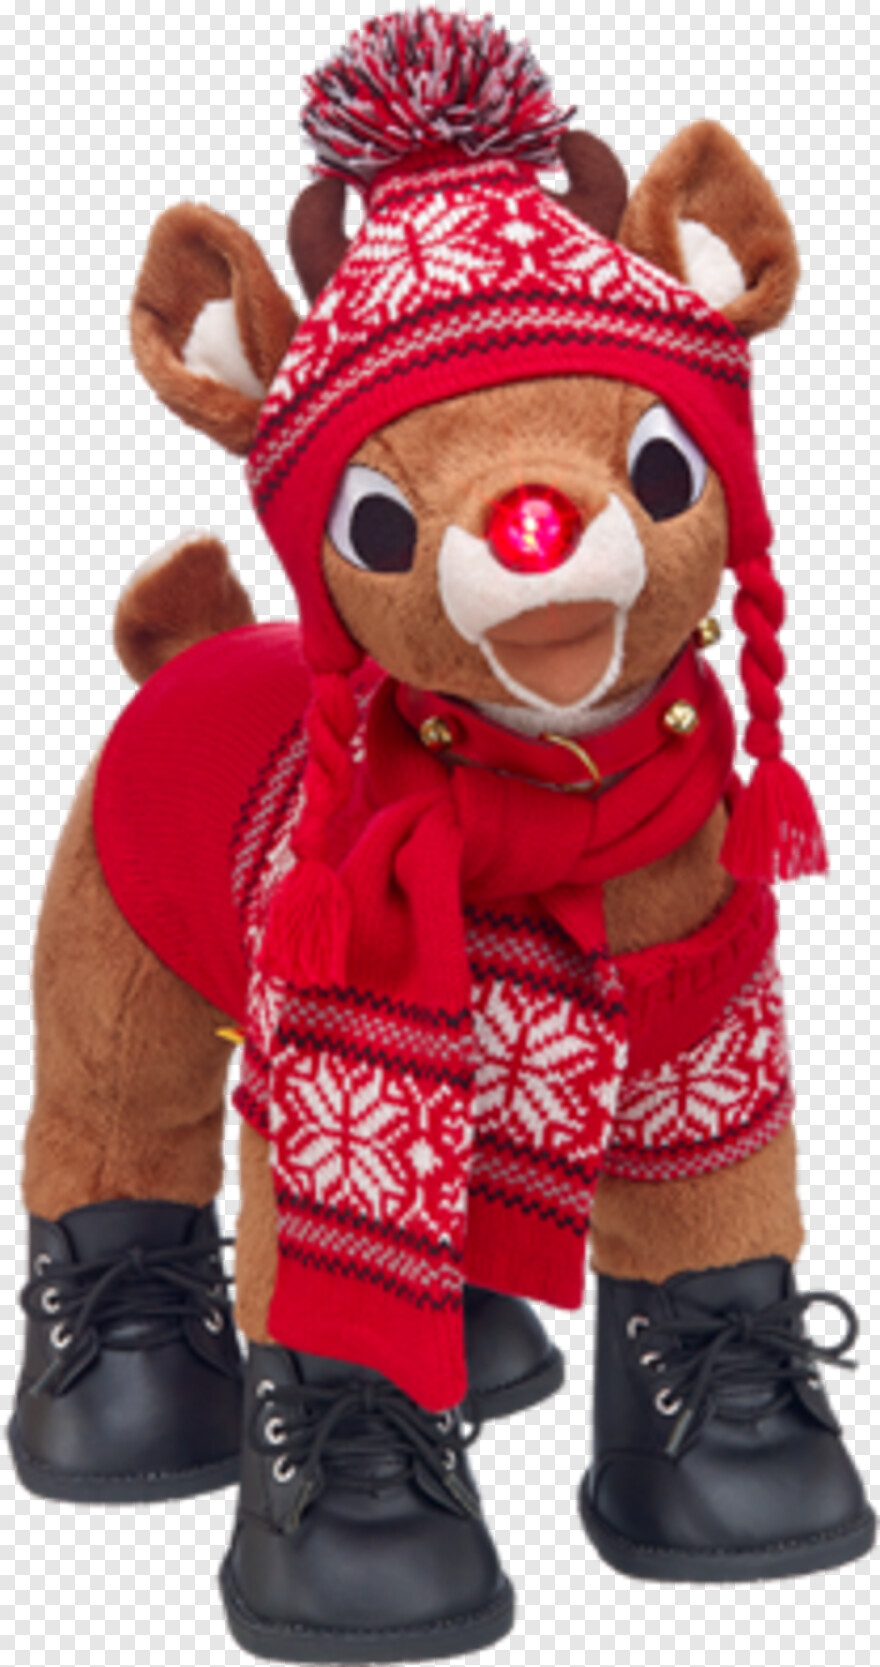 rudolph-the-red-nosed-reindeer # 387942